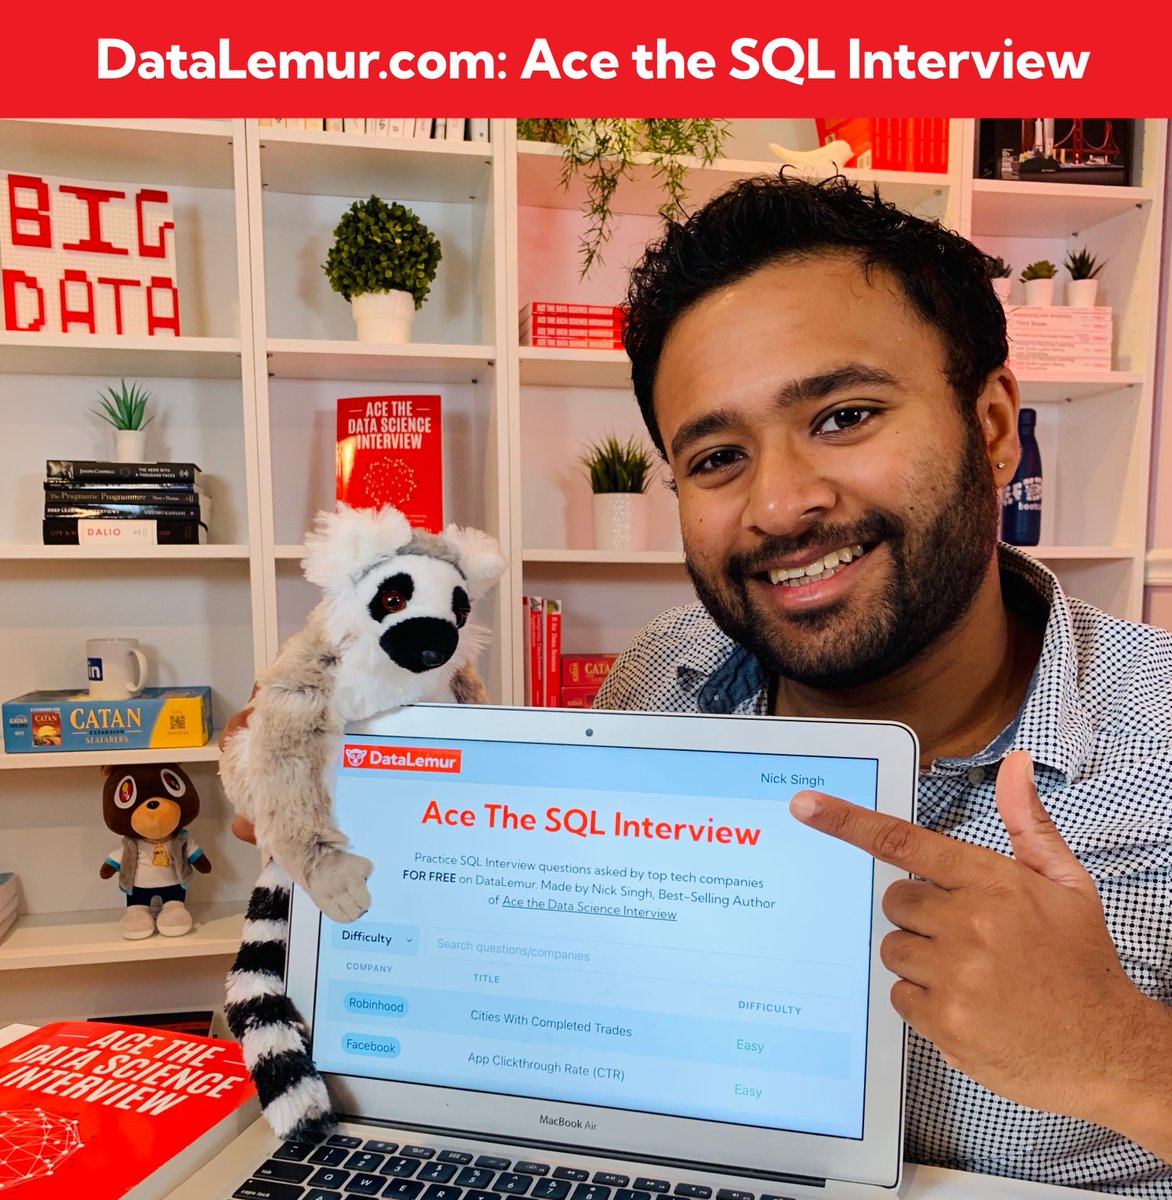 🚨 DataLemur is LIVE! 🚨 Solve 50+ SQL Interview questions from companies like Facebook, Amazon, and Google for FREE! Even if you aren’t on the job hunt, DataLemur is still a great place to practice your #SQL skills on tricky problems: datalemur.com